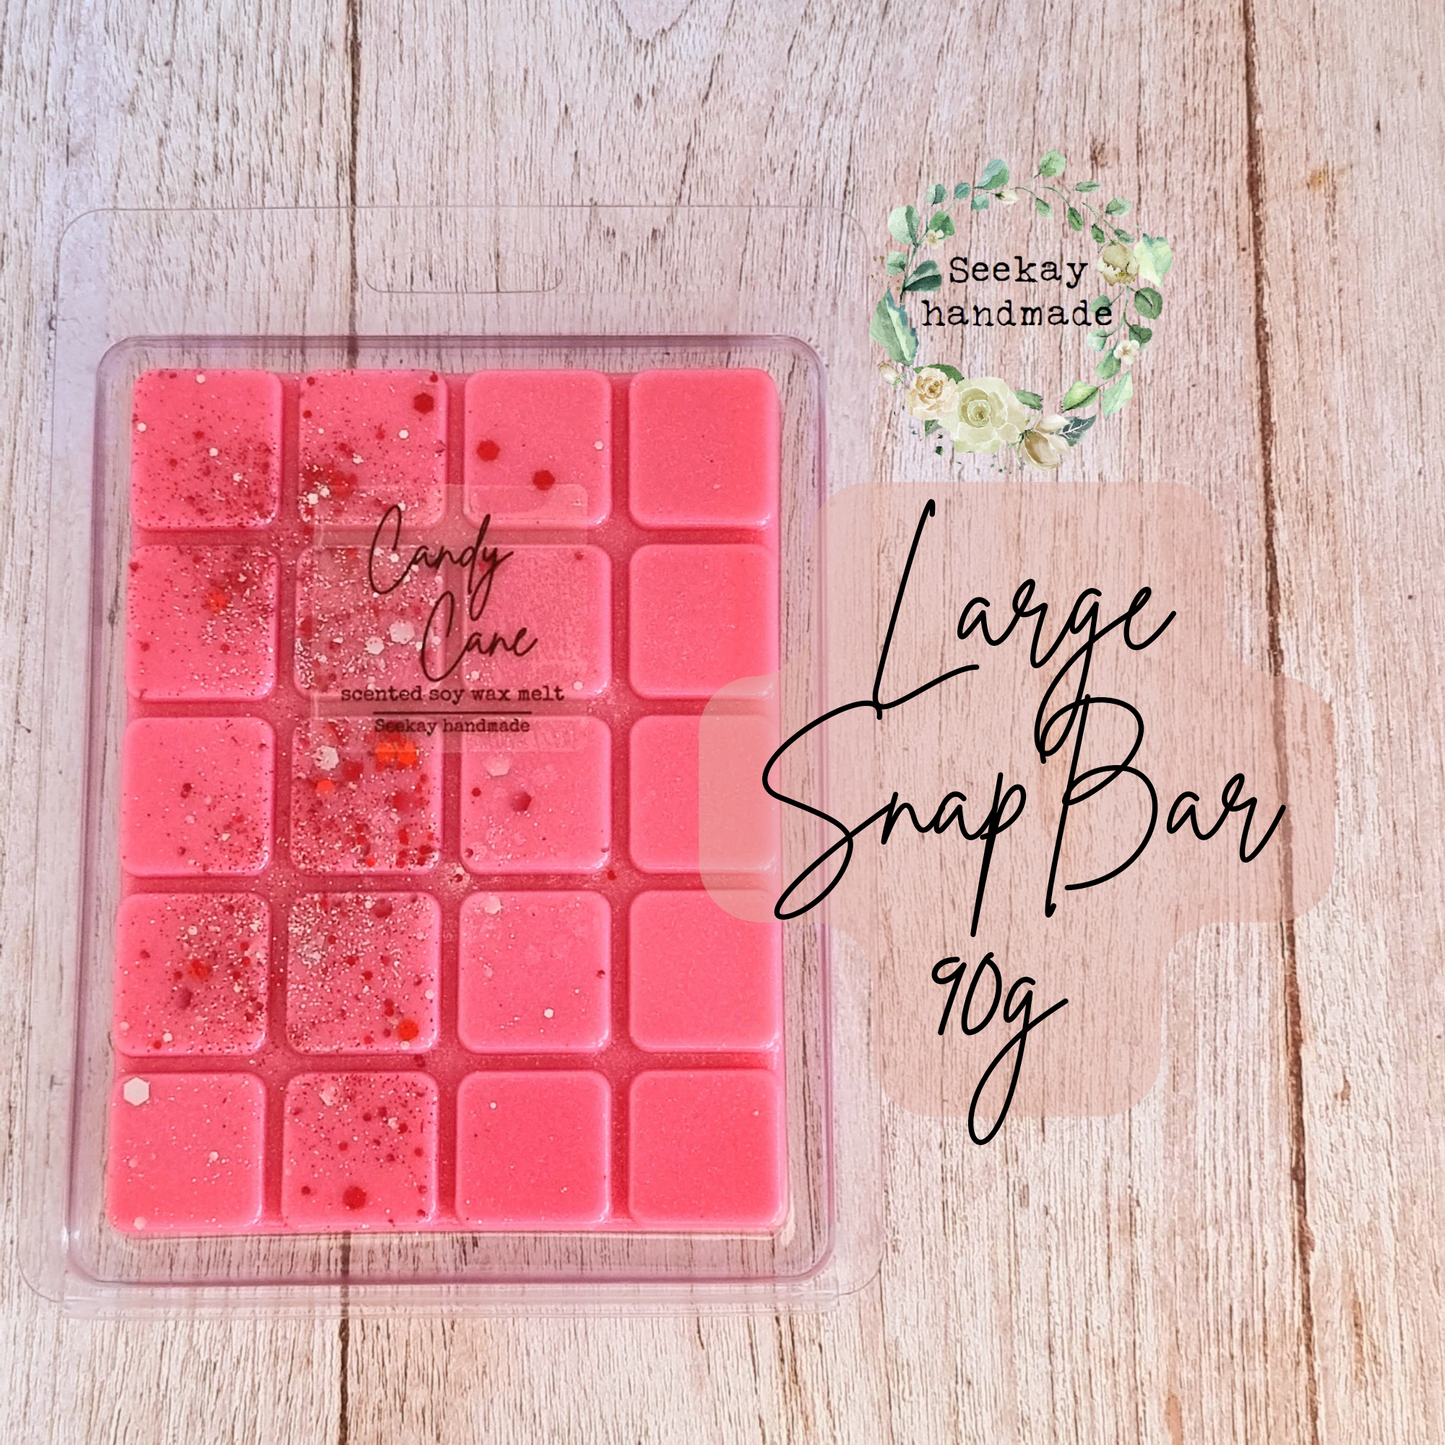 Candy Cane scented soy wax melt